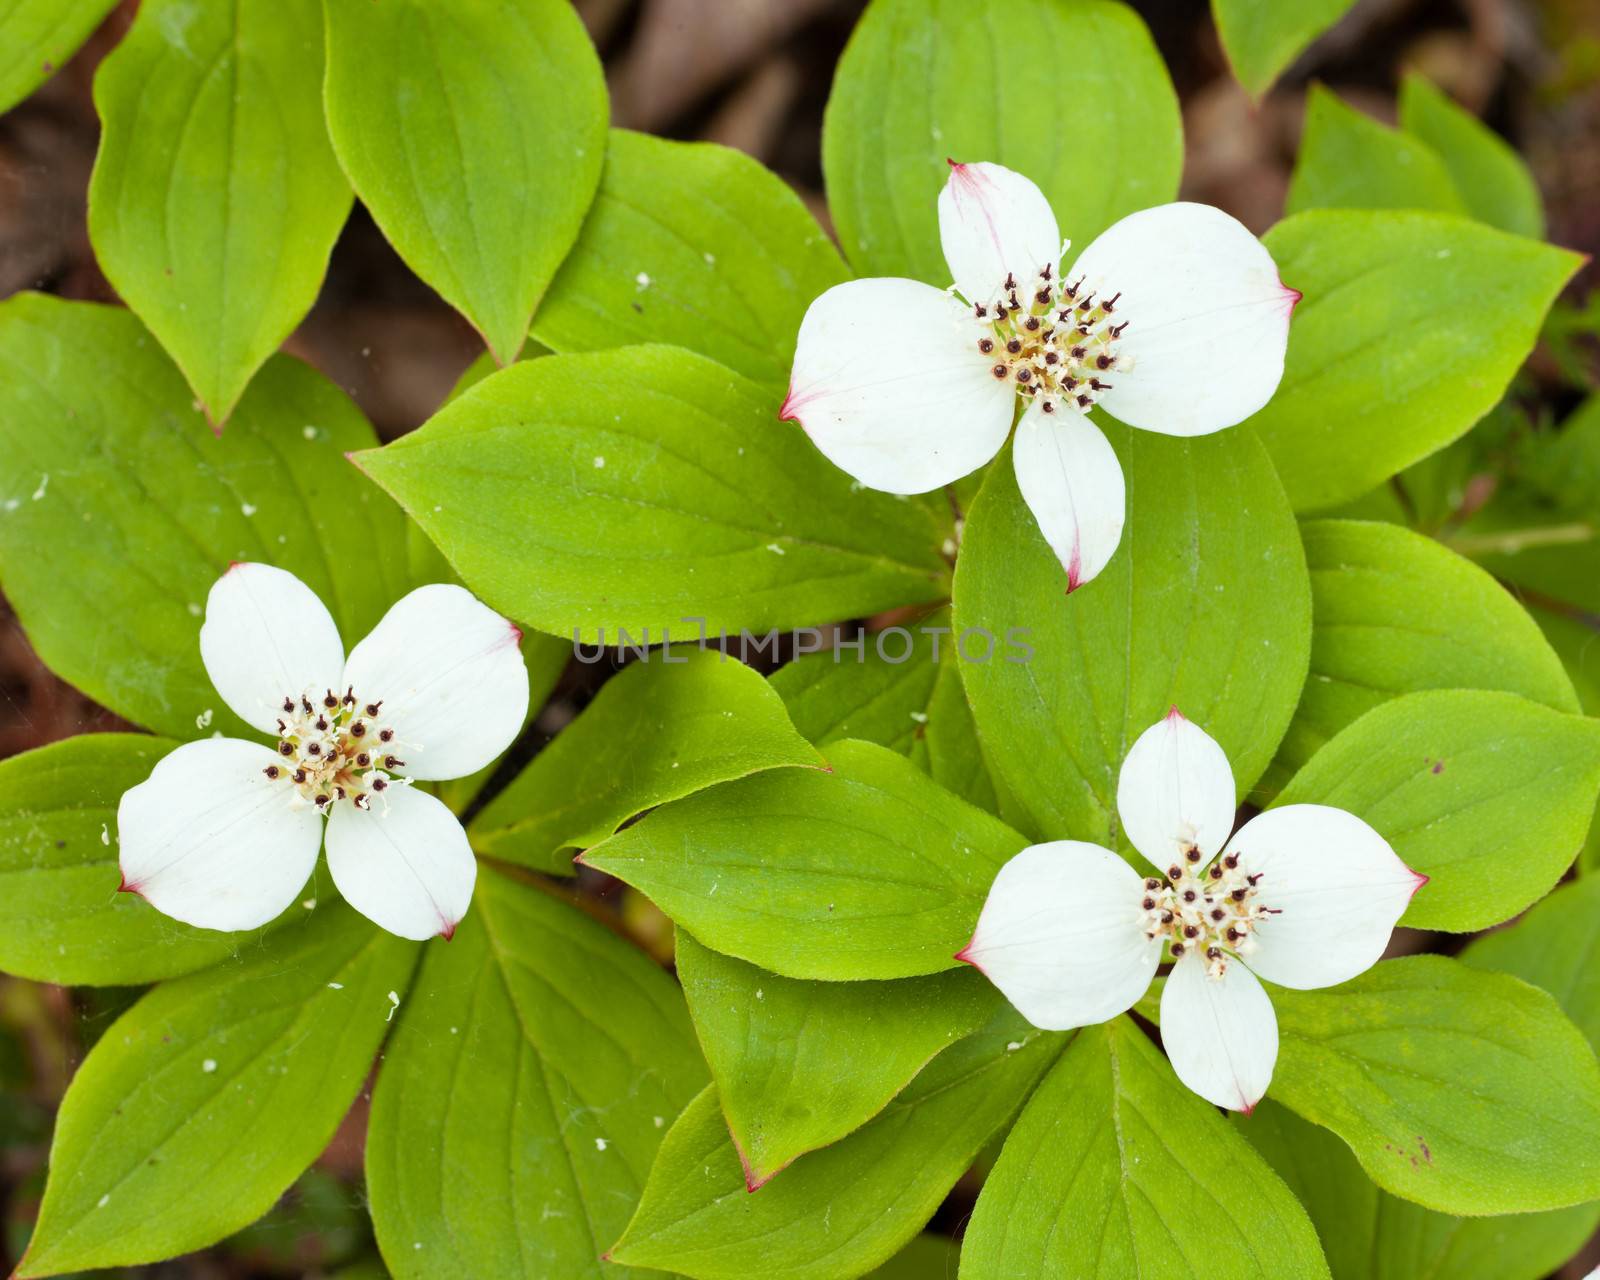 Bunchberry flowers Cornus canadensis or creeping dogwood grow as a carpet of wildflowers on the forest floor in boreal forest taiga of the Yukon Territory Canada